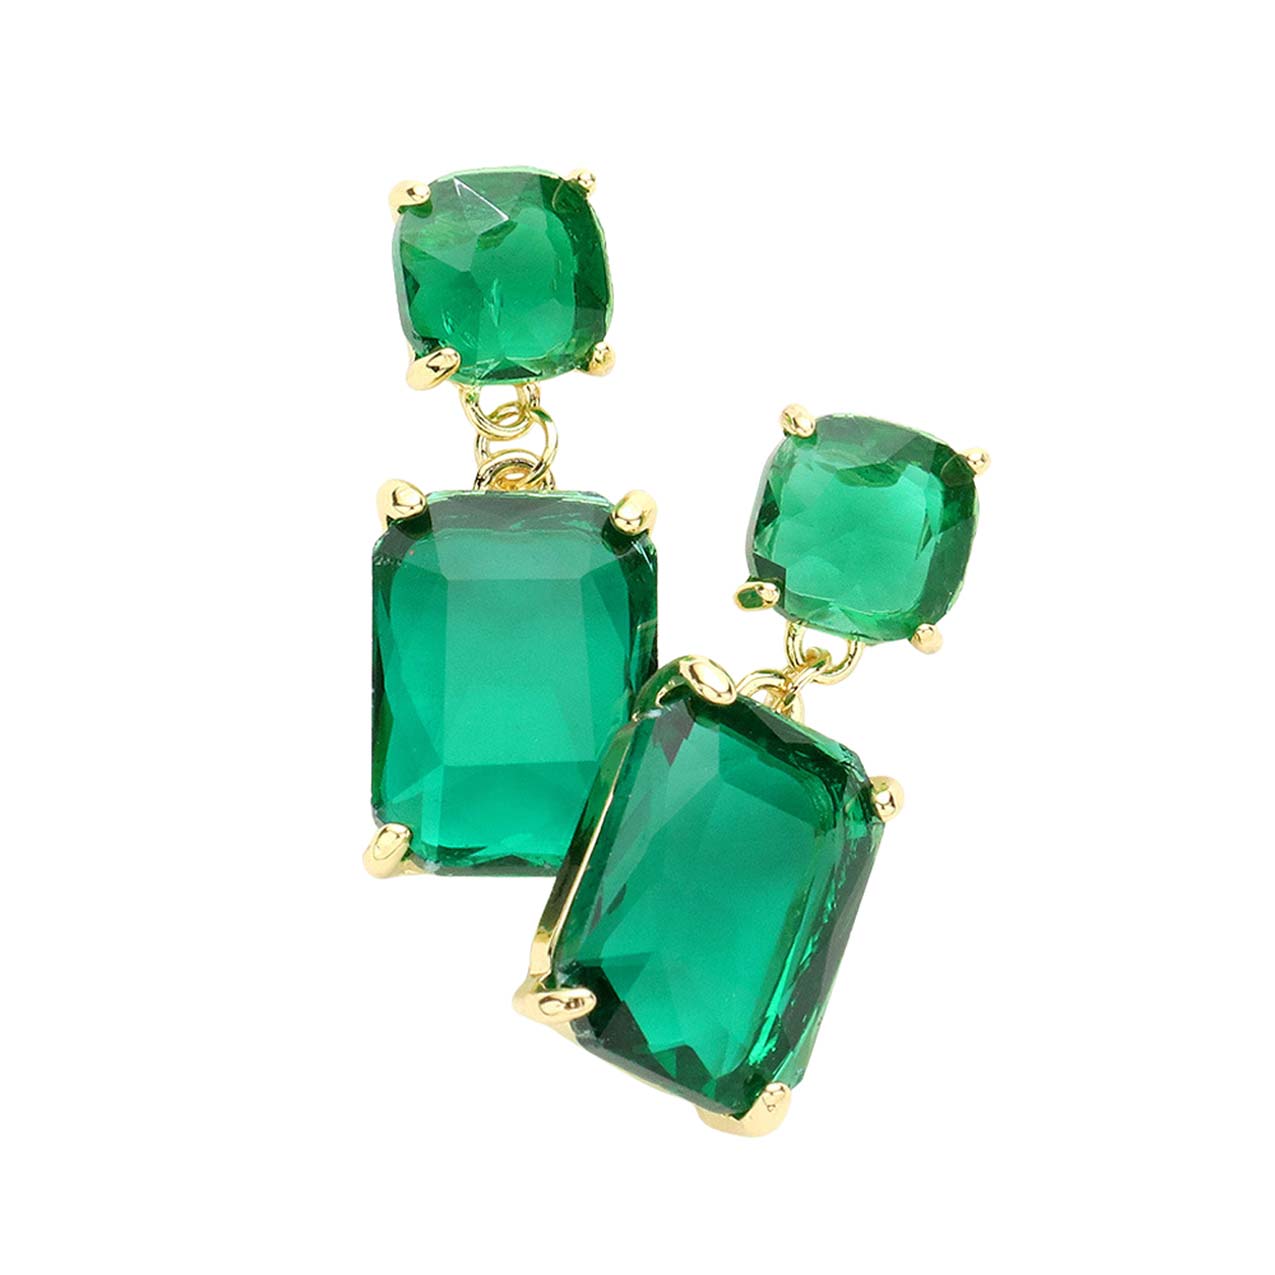 Emerald Square Rectangle Link Dangle Evening Earrings, Beautiful Square Rectangle shaped dangle earrings. These elegant, comfortable earrings can be worn all day to dress up any outfit. The elegance of these earrings puts on a pop of color to complete your ensemble. The perfect accessory for adding just the right amount of shimmer and a touch of class to special events.